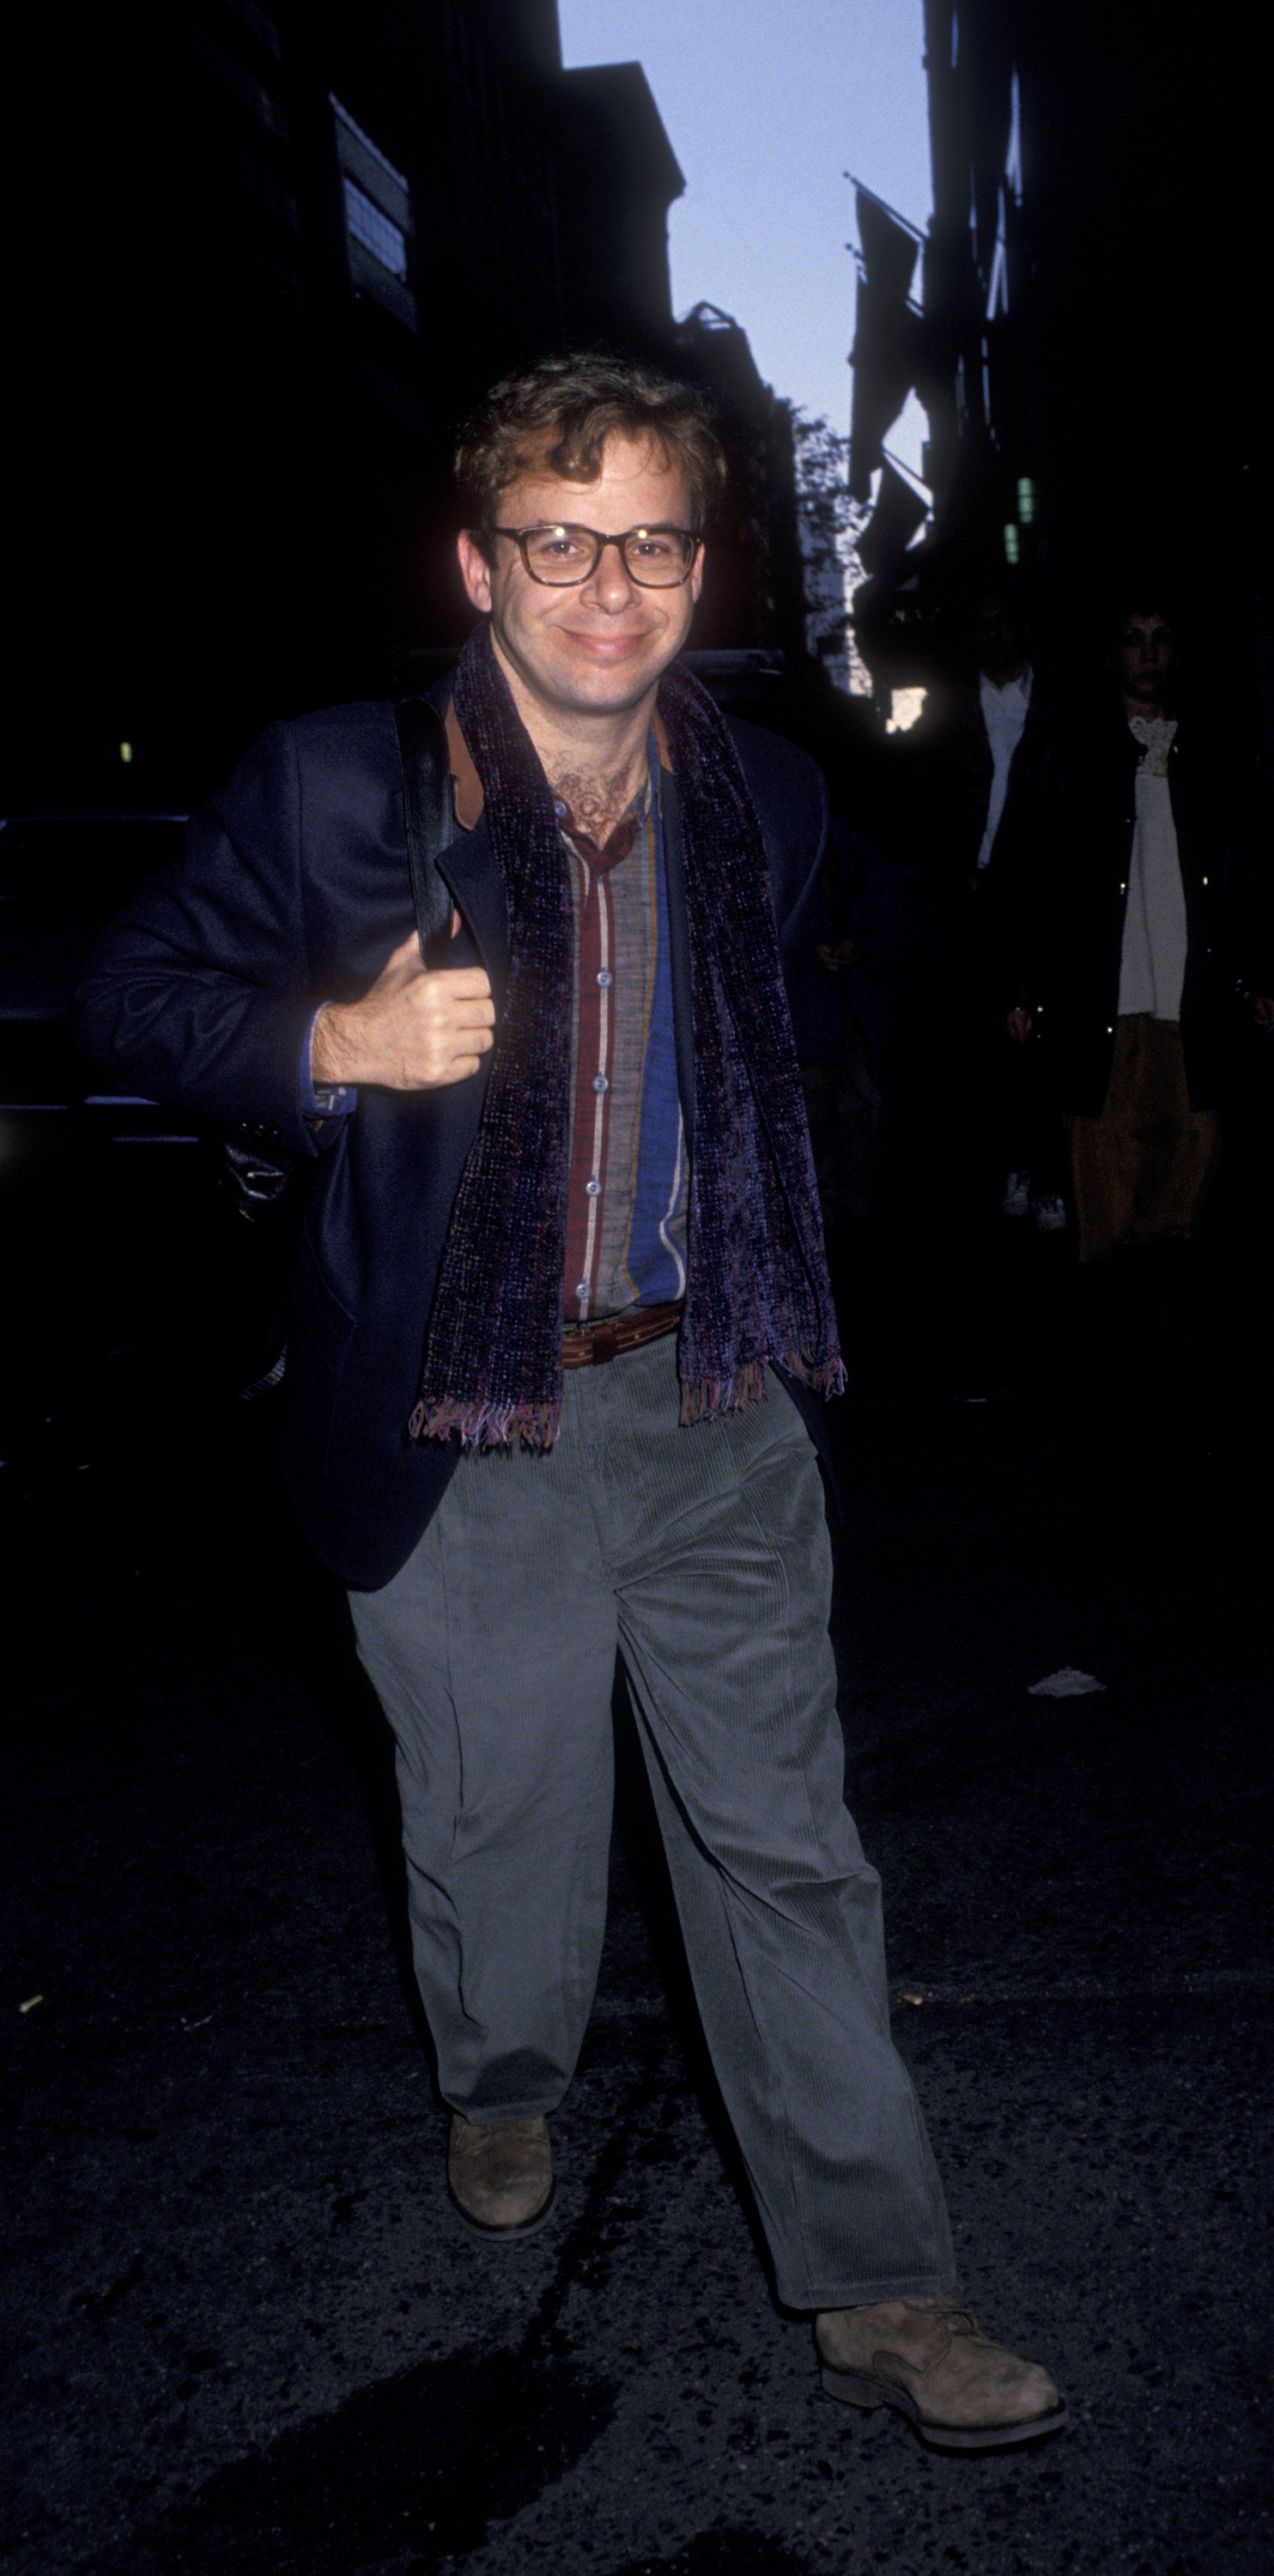 Actor Rick Moranis attending the premiere of "The Nutcracker" at the Ziegfeld Theater on November 21, 1993  in New York City. | Source: Getty Images